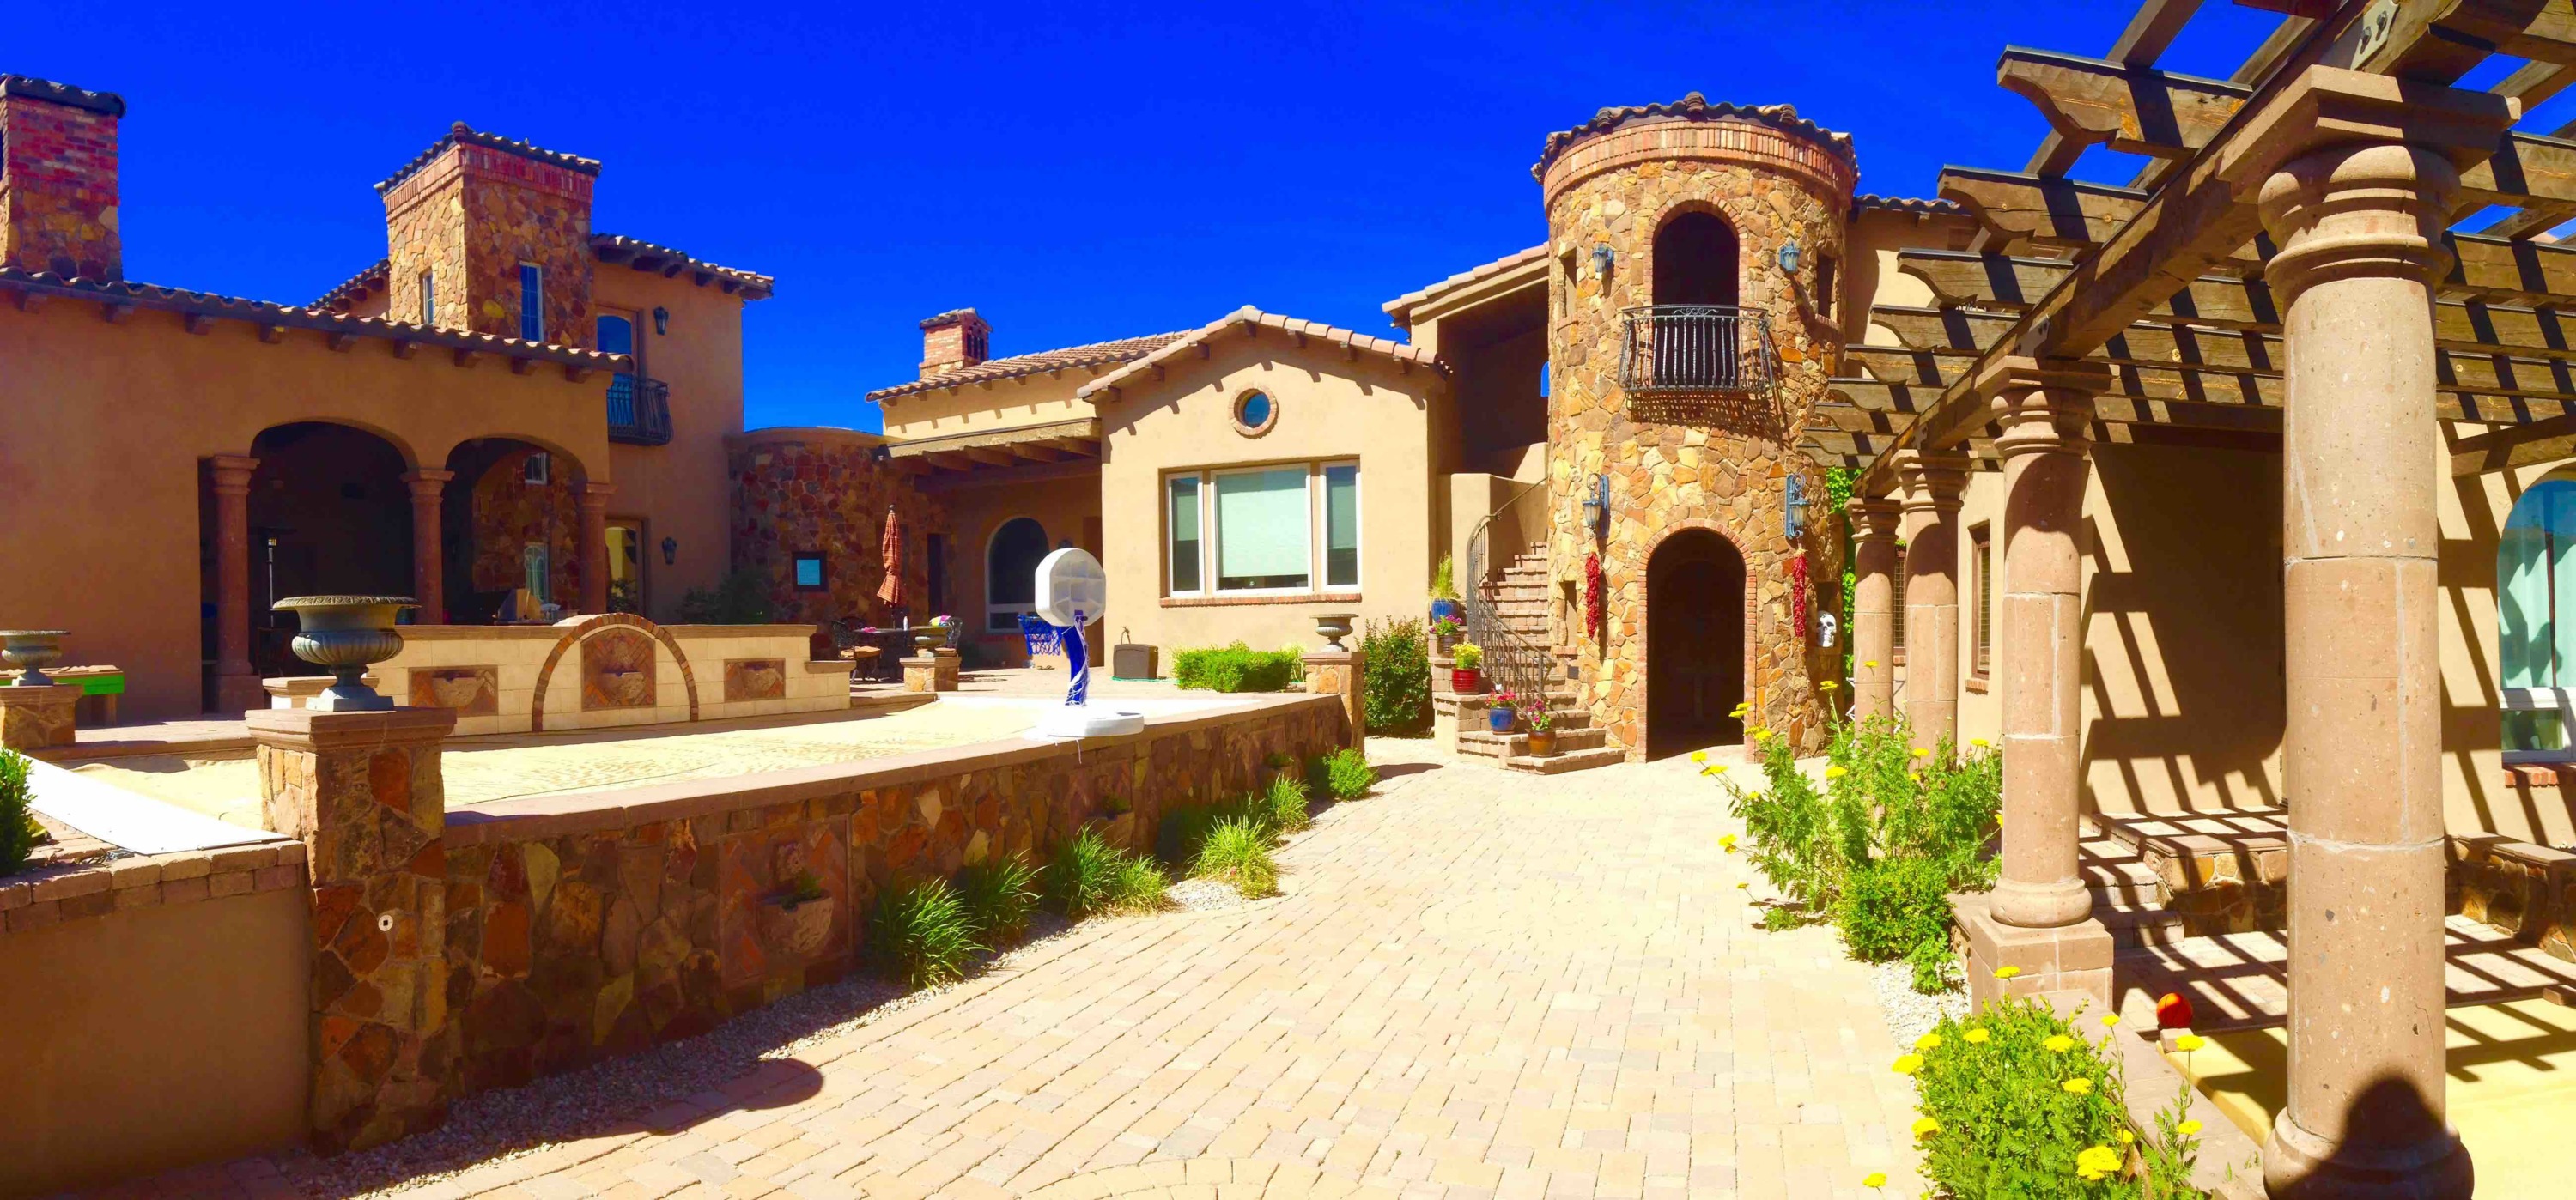 Albuquerque Landscaping picture of pavers and hardscaping - extrascapes